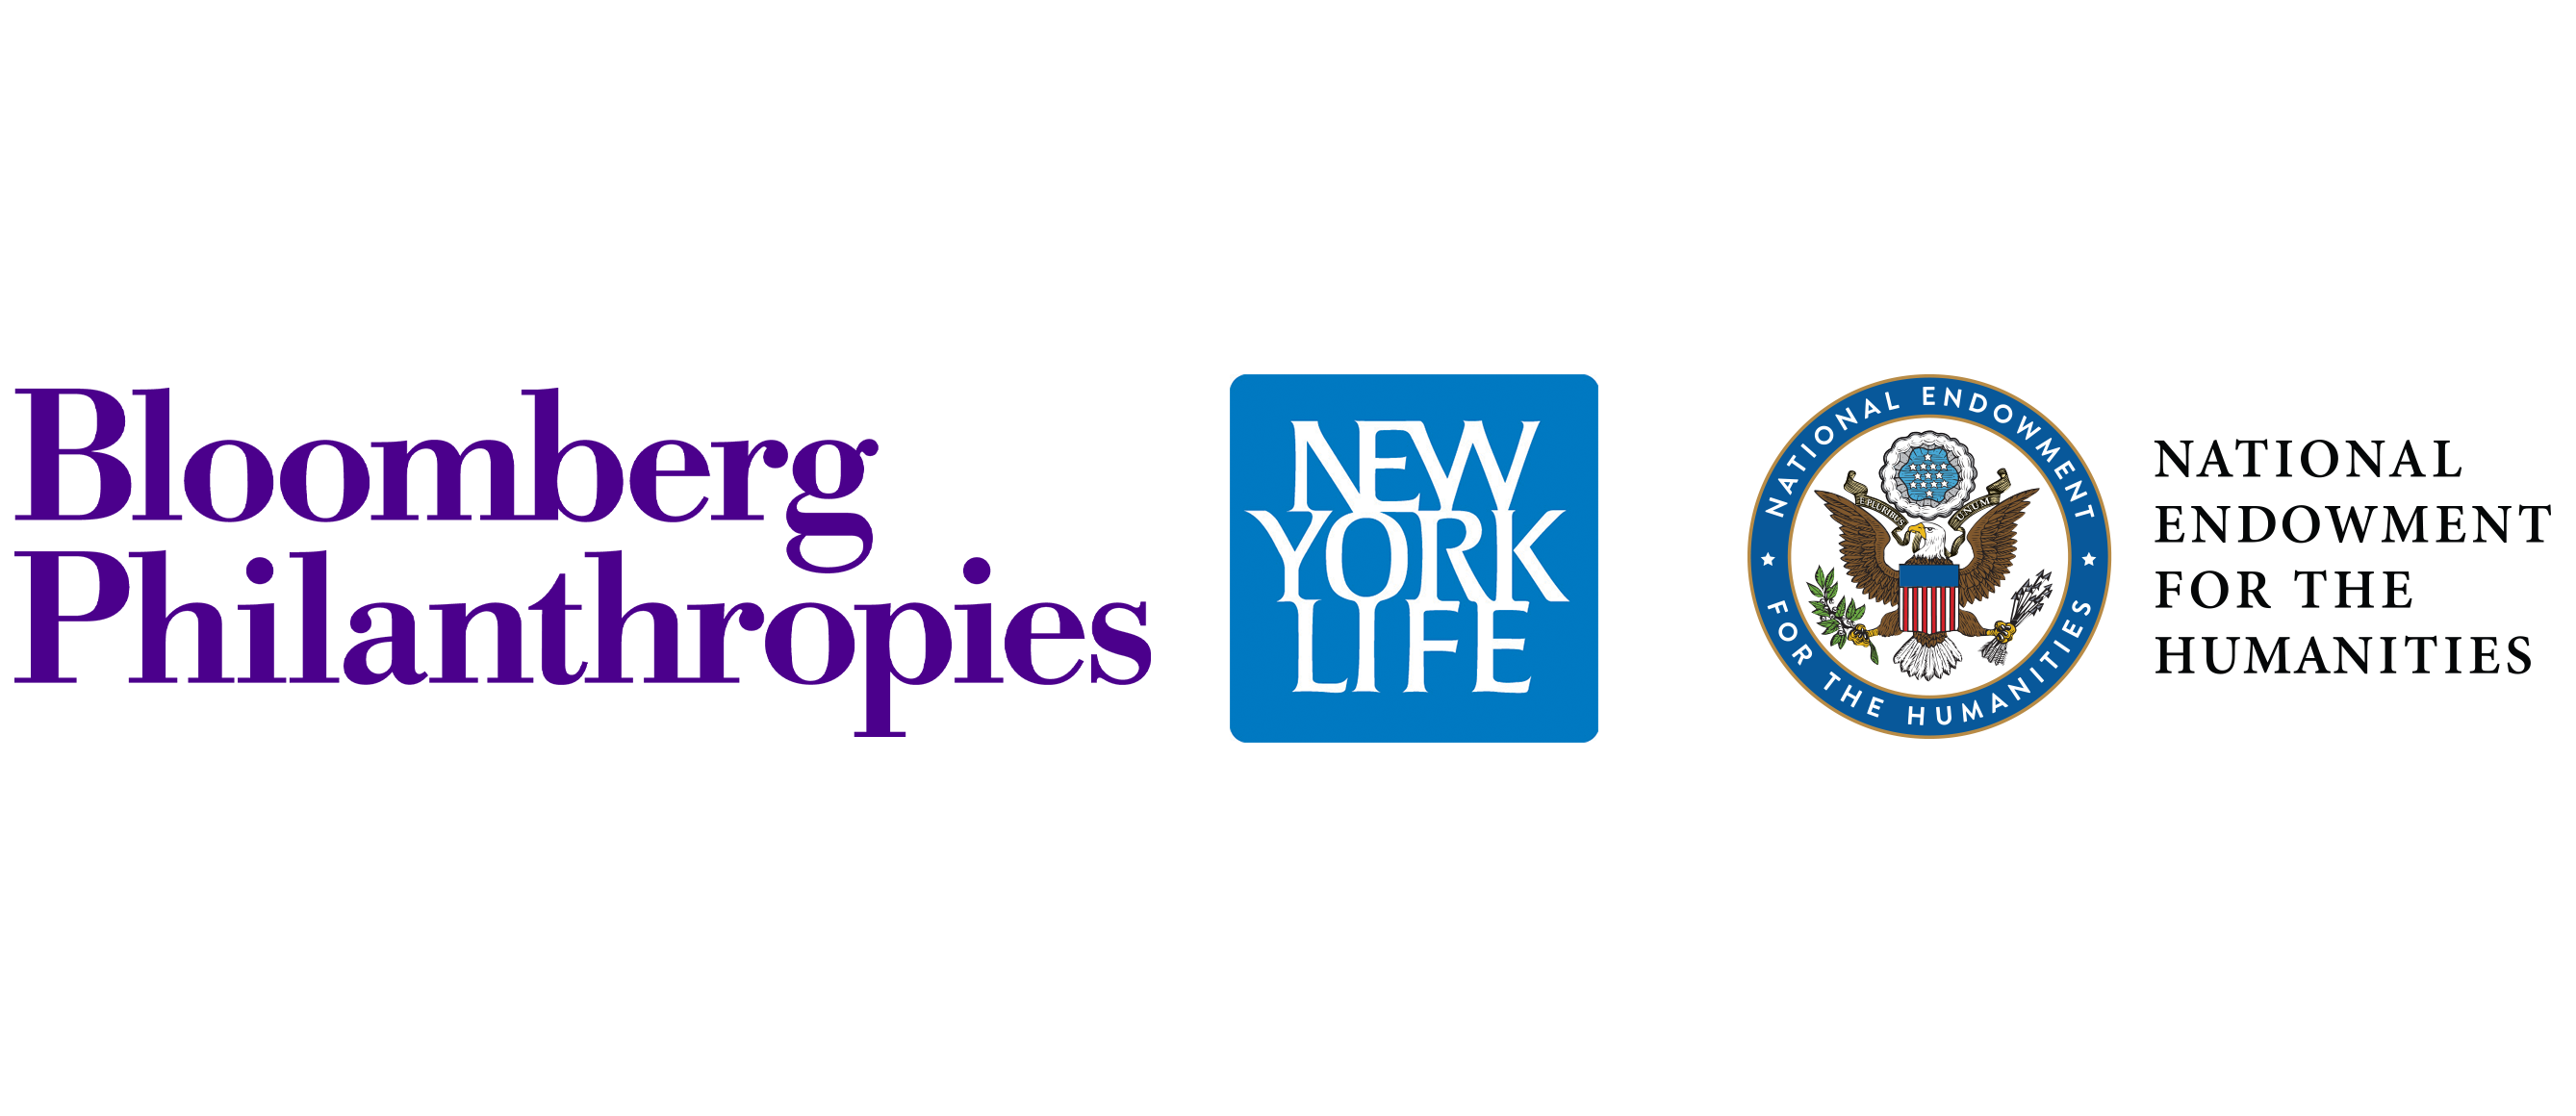 Logos for Bloomberg Philanthropies, New York Life, and the National Endowment for the Humanities.